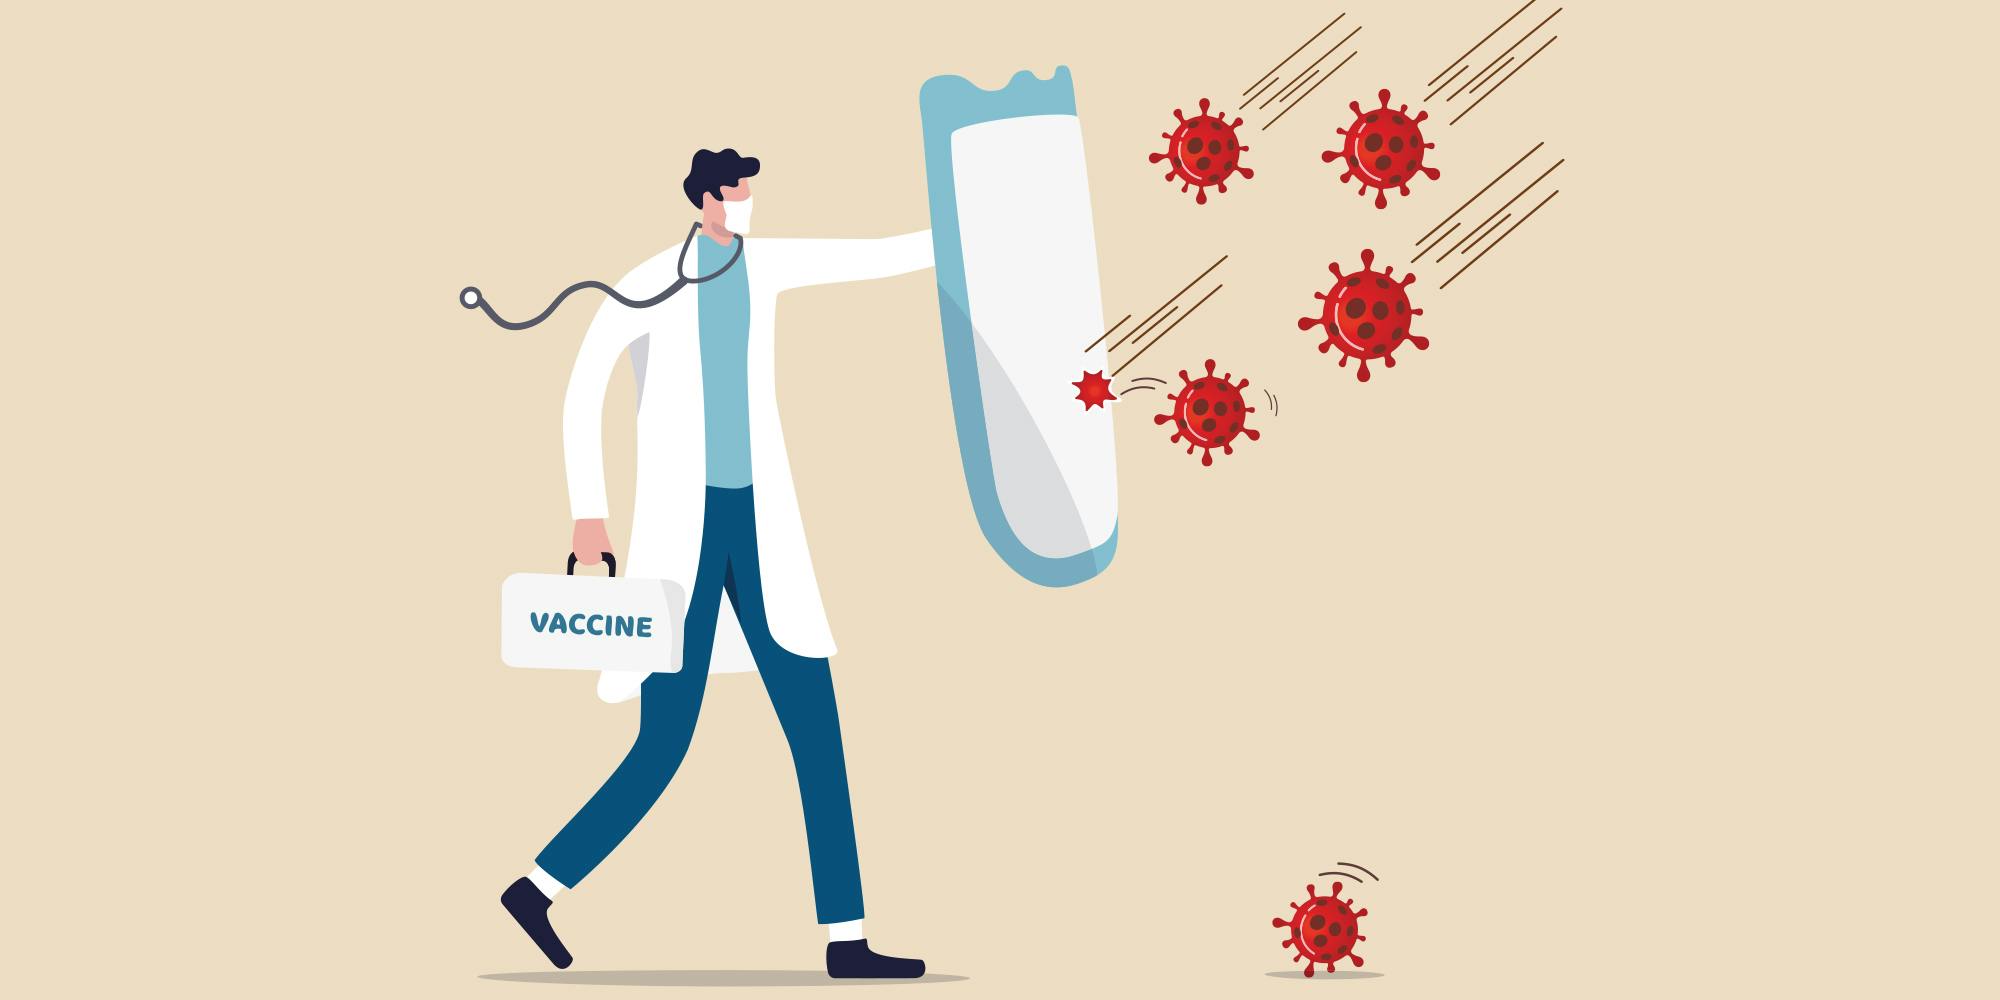 Illustration of a doctor carrying the COVID-19 vaccine and a shield blocking coronavirus particles.